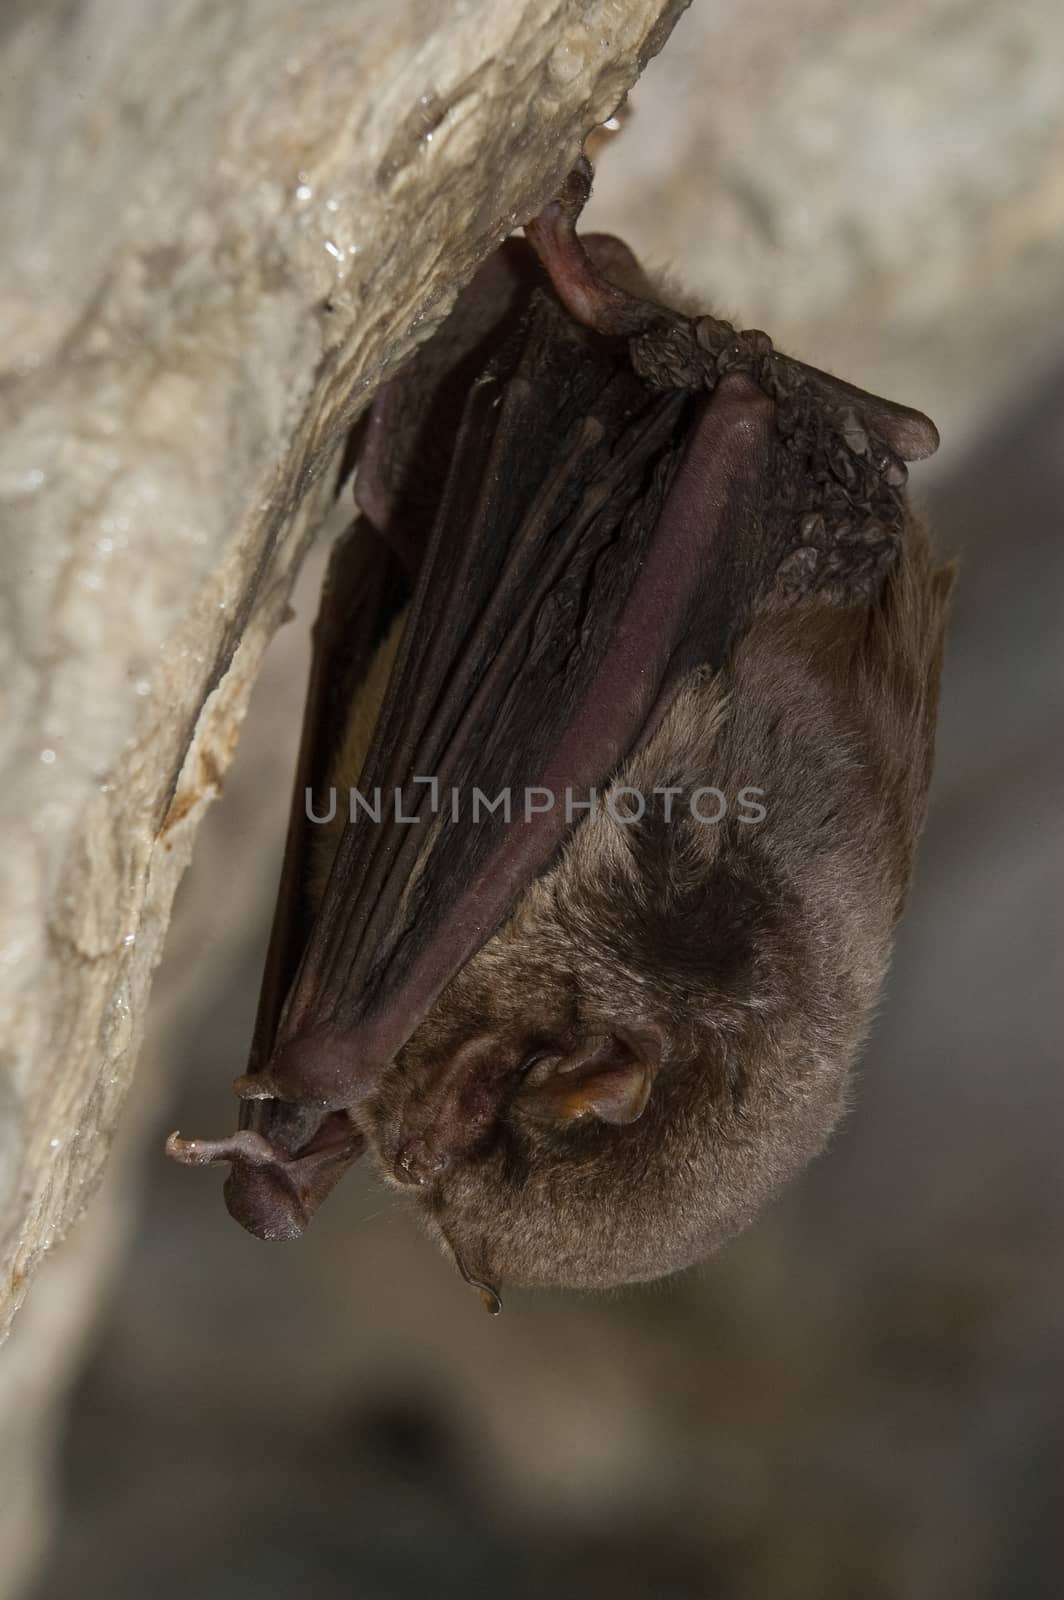 Bat-bent common miniopterus schreibersii, resting in a cave by jalonsohu@gmail.com